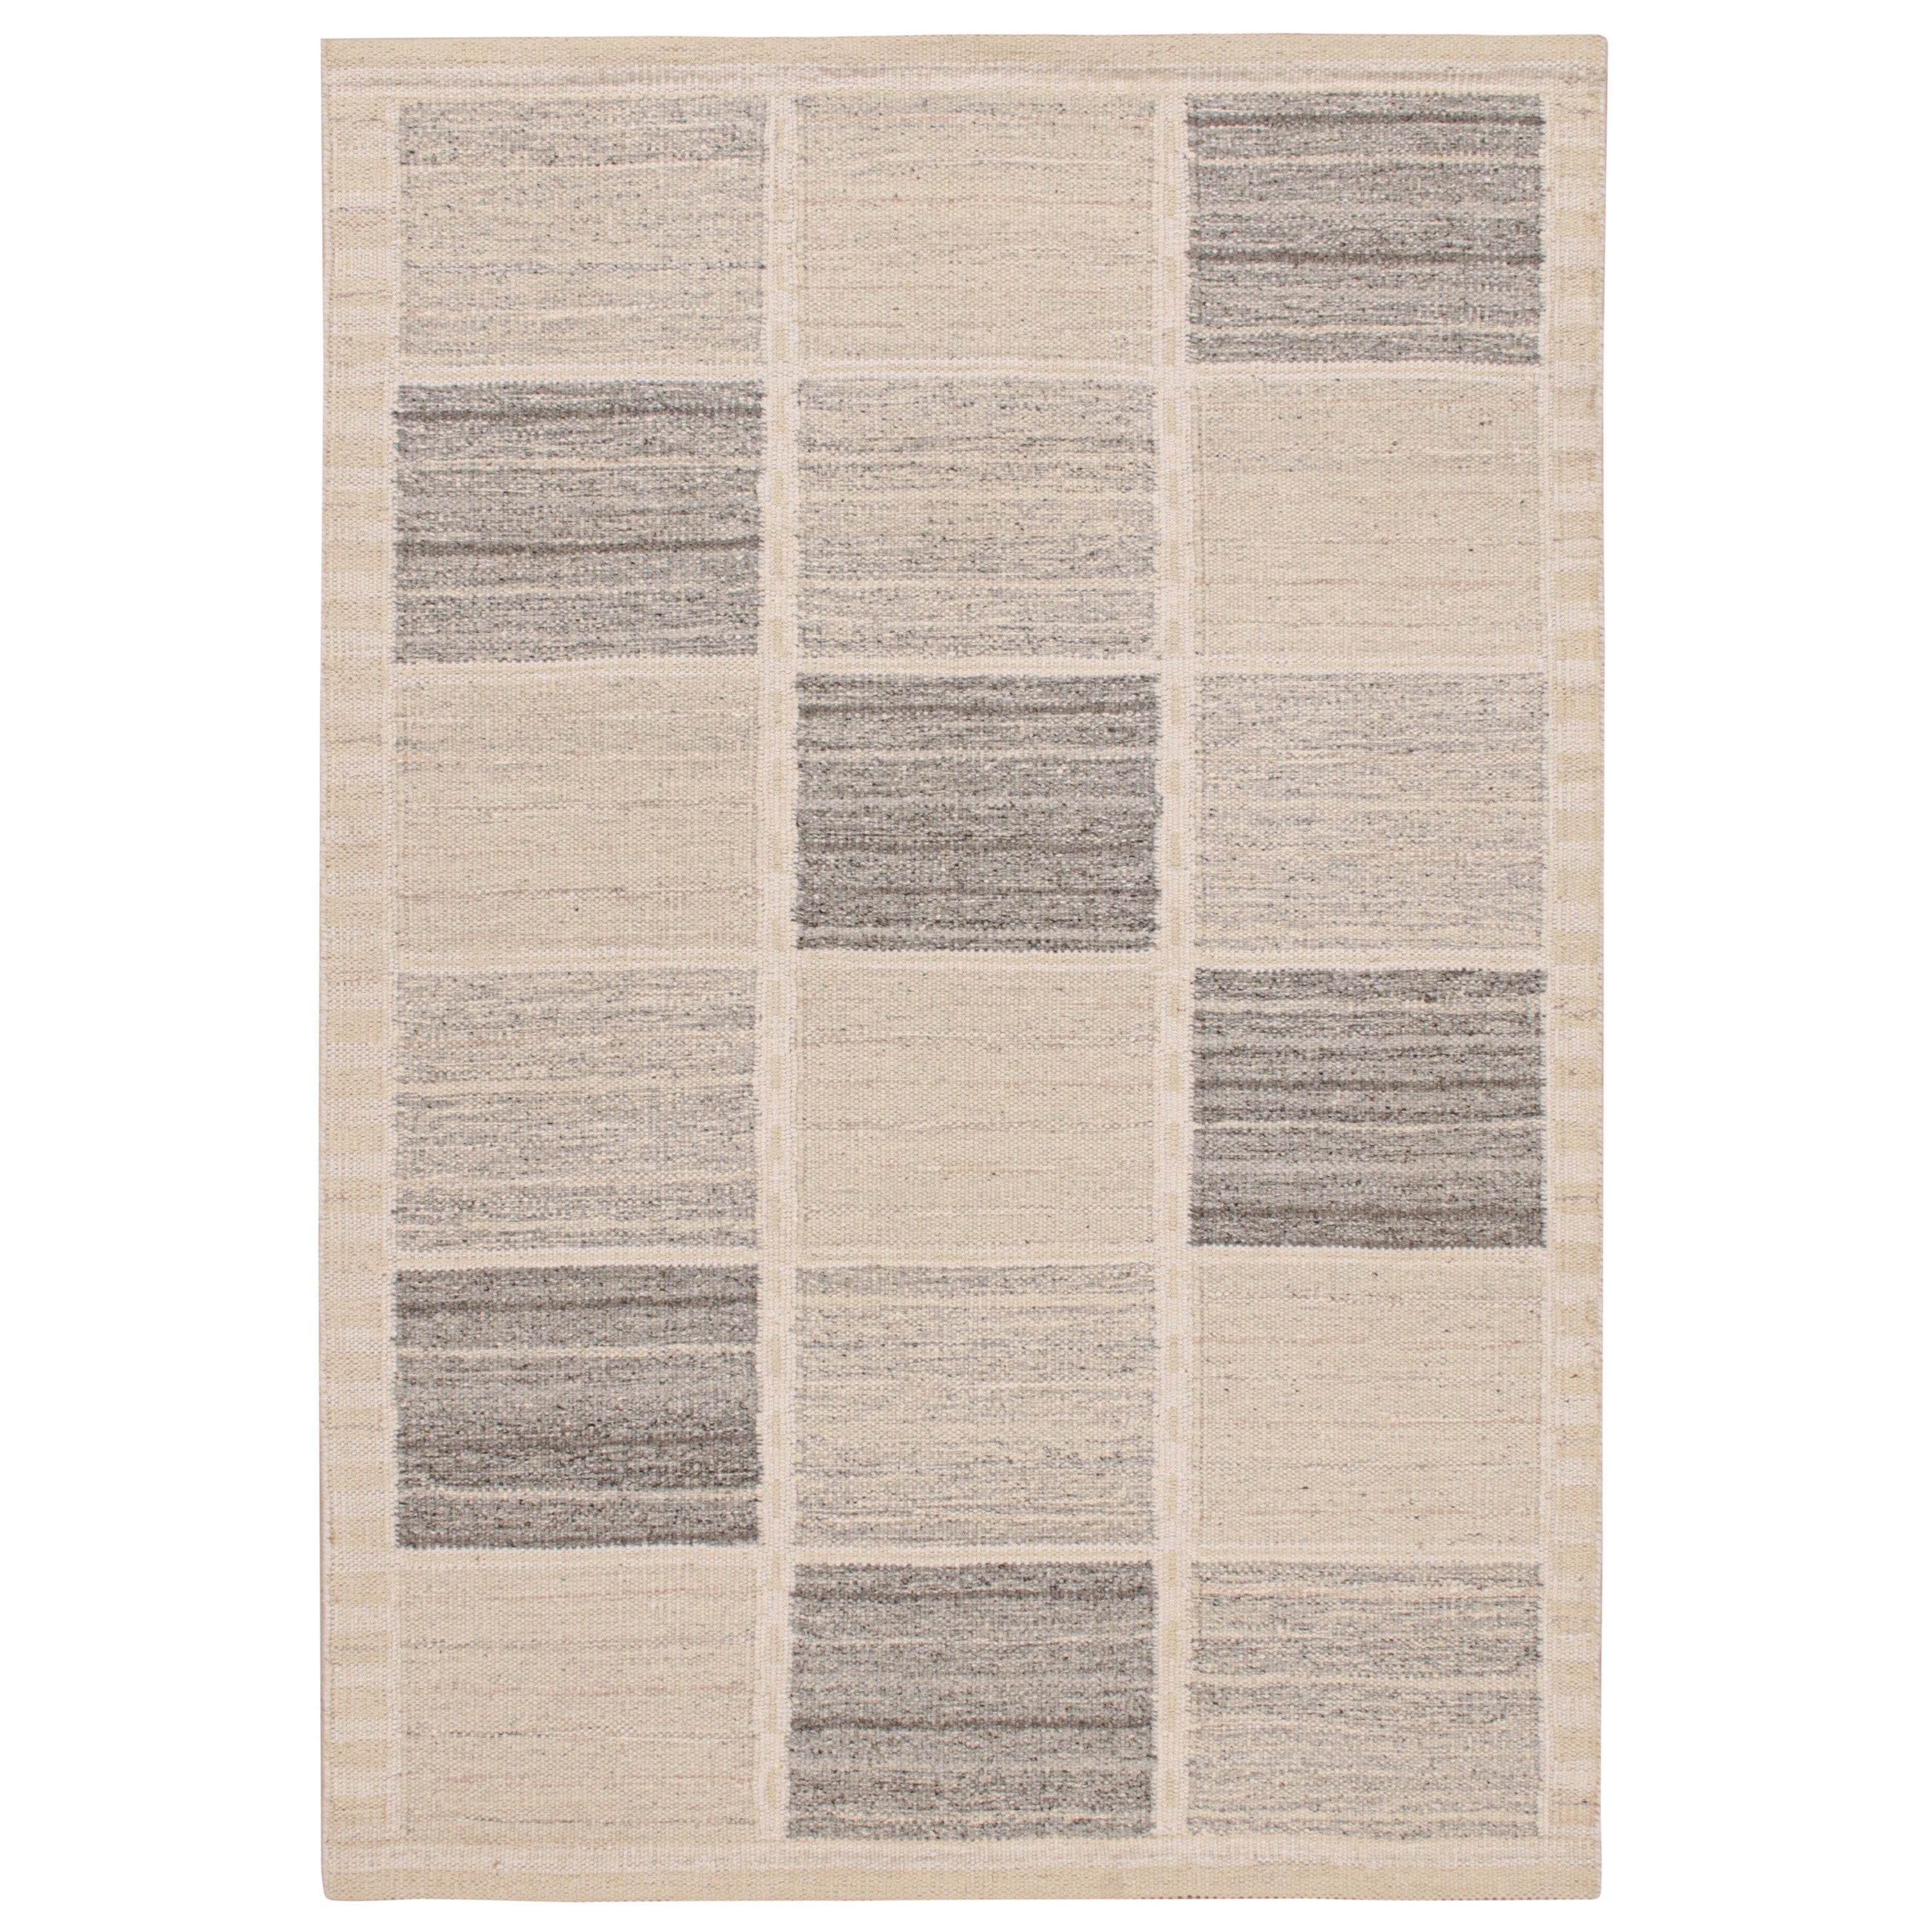 Rug & Kilim’s Scandinavian Style Kilim with Beige and Gray Geometric Patterns For Sale